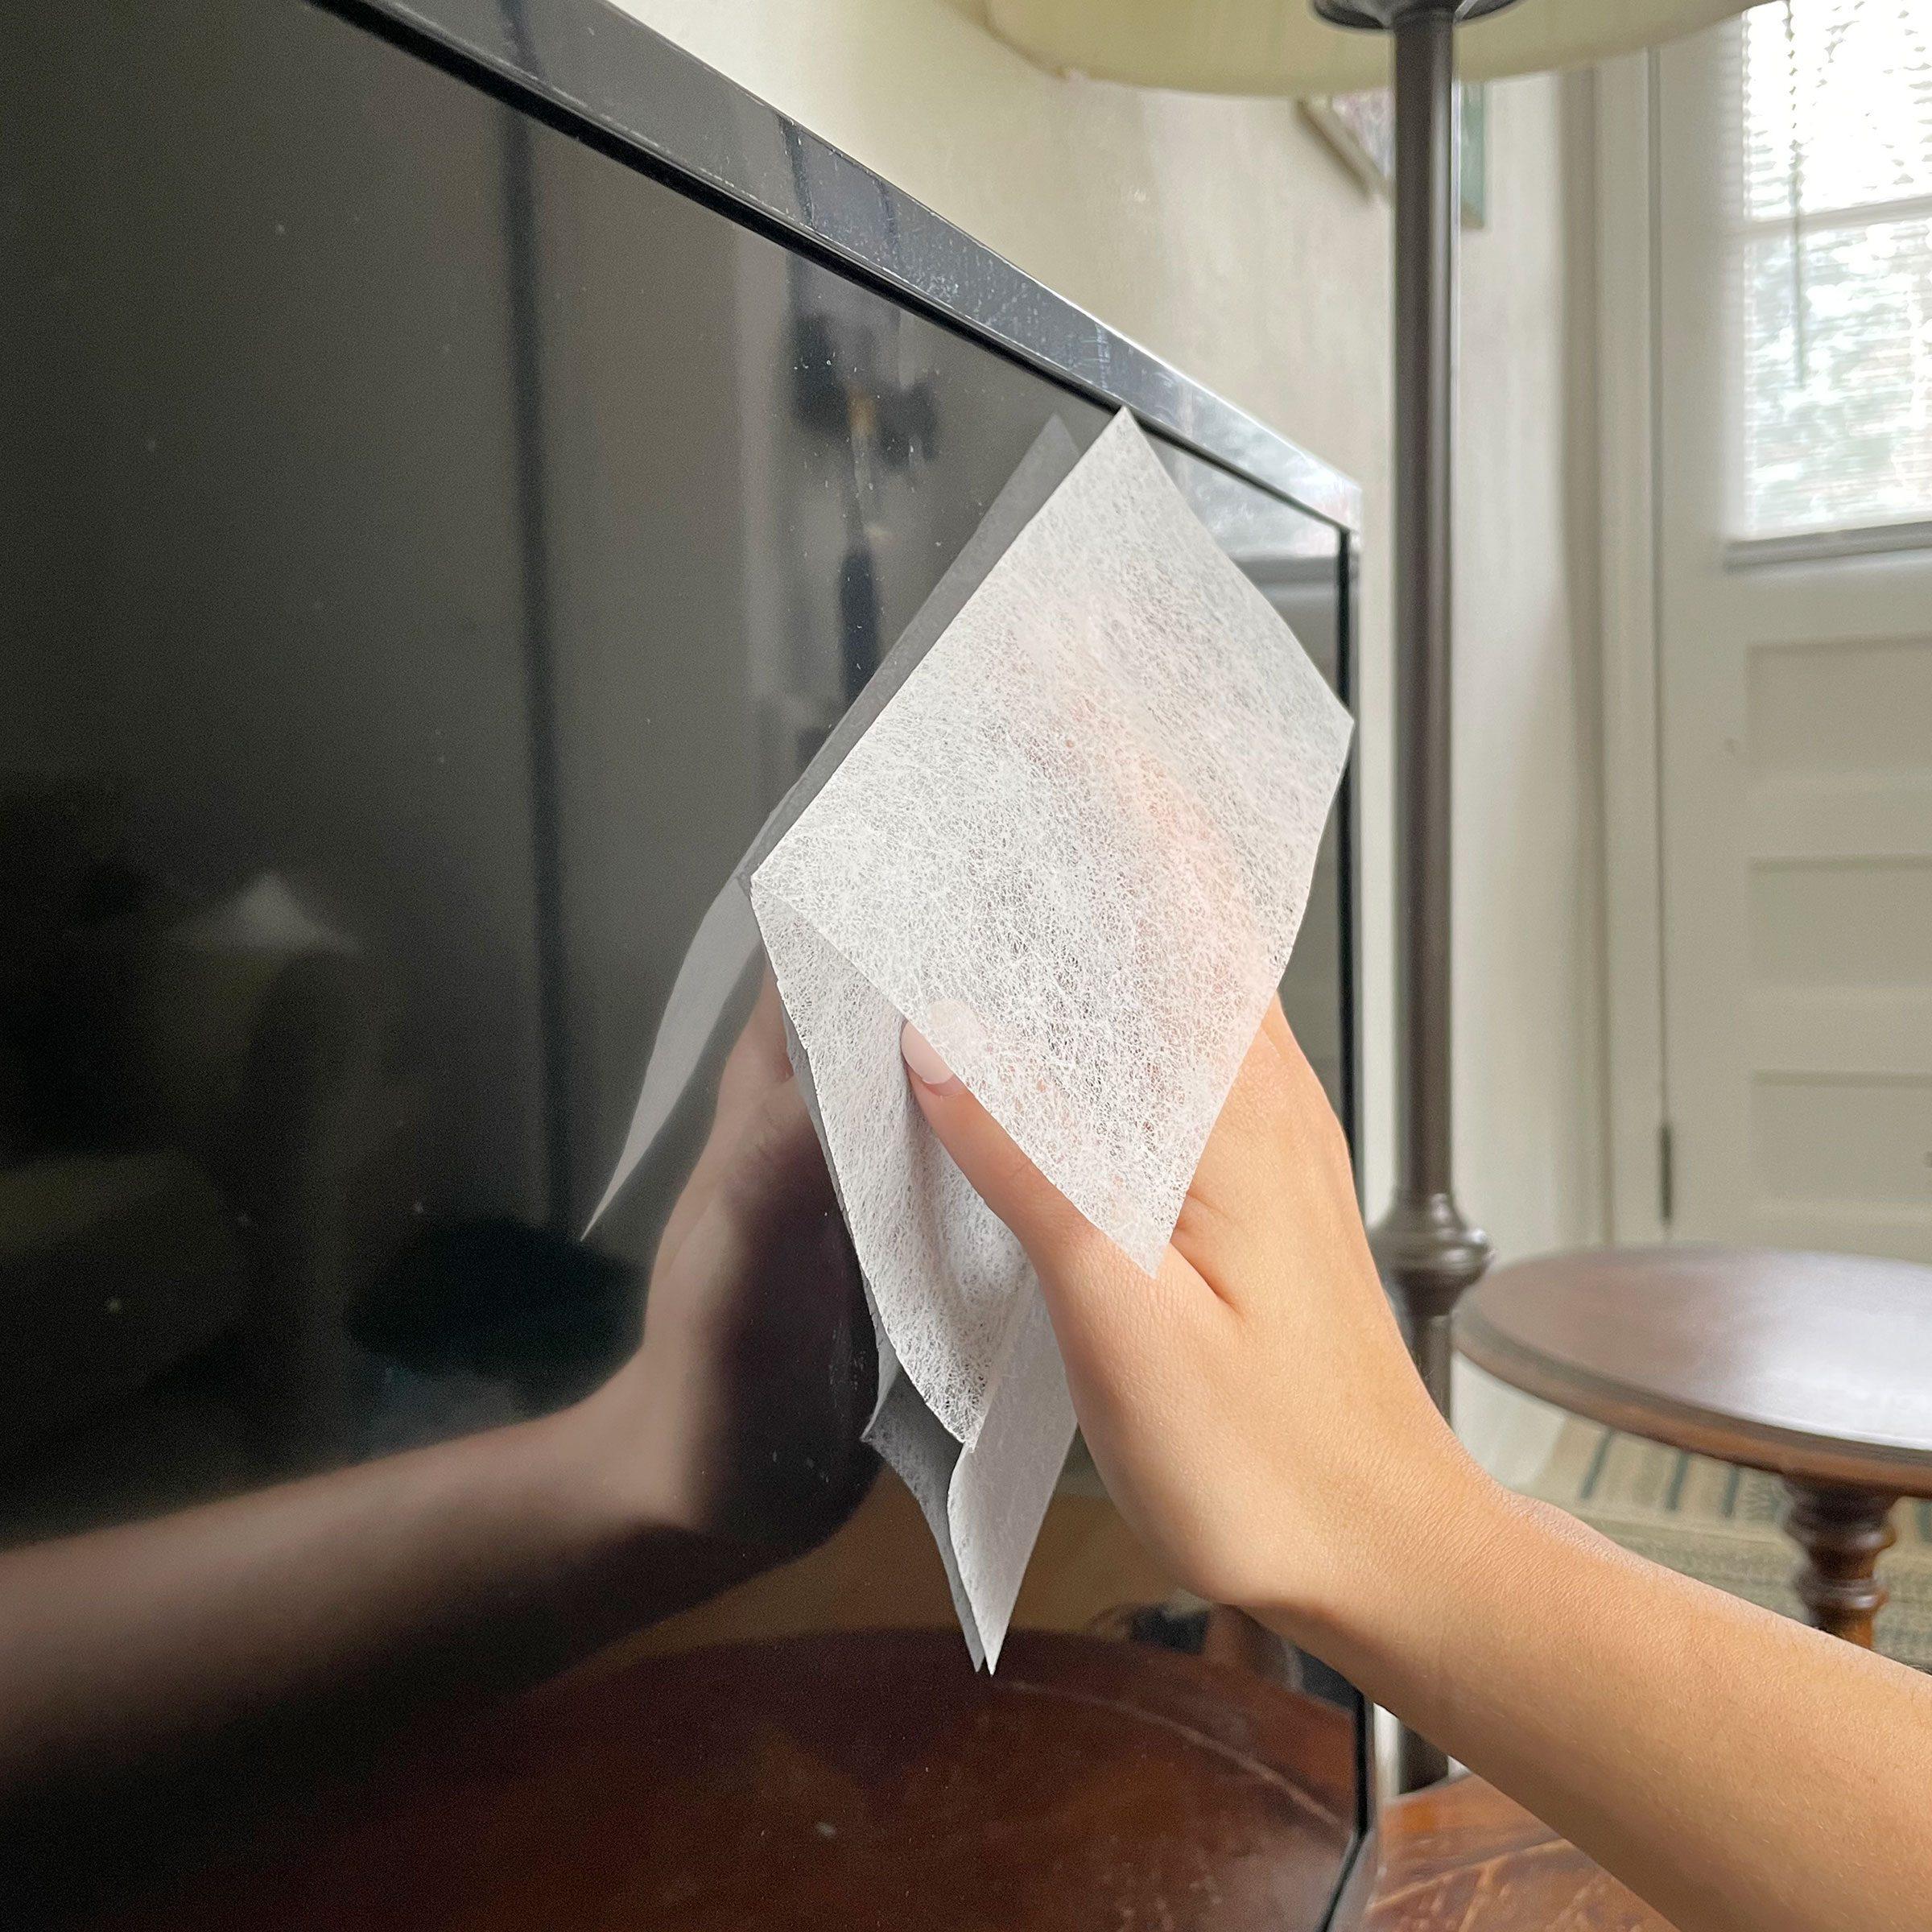 https://www.tasteofhome.com/wp-content/uploads/2022/04/dust-tv-with-dryer-sheet-AD-TOH.jpg?fit=700%2C700